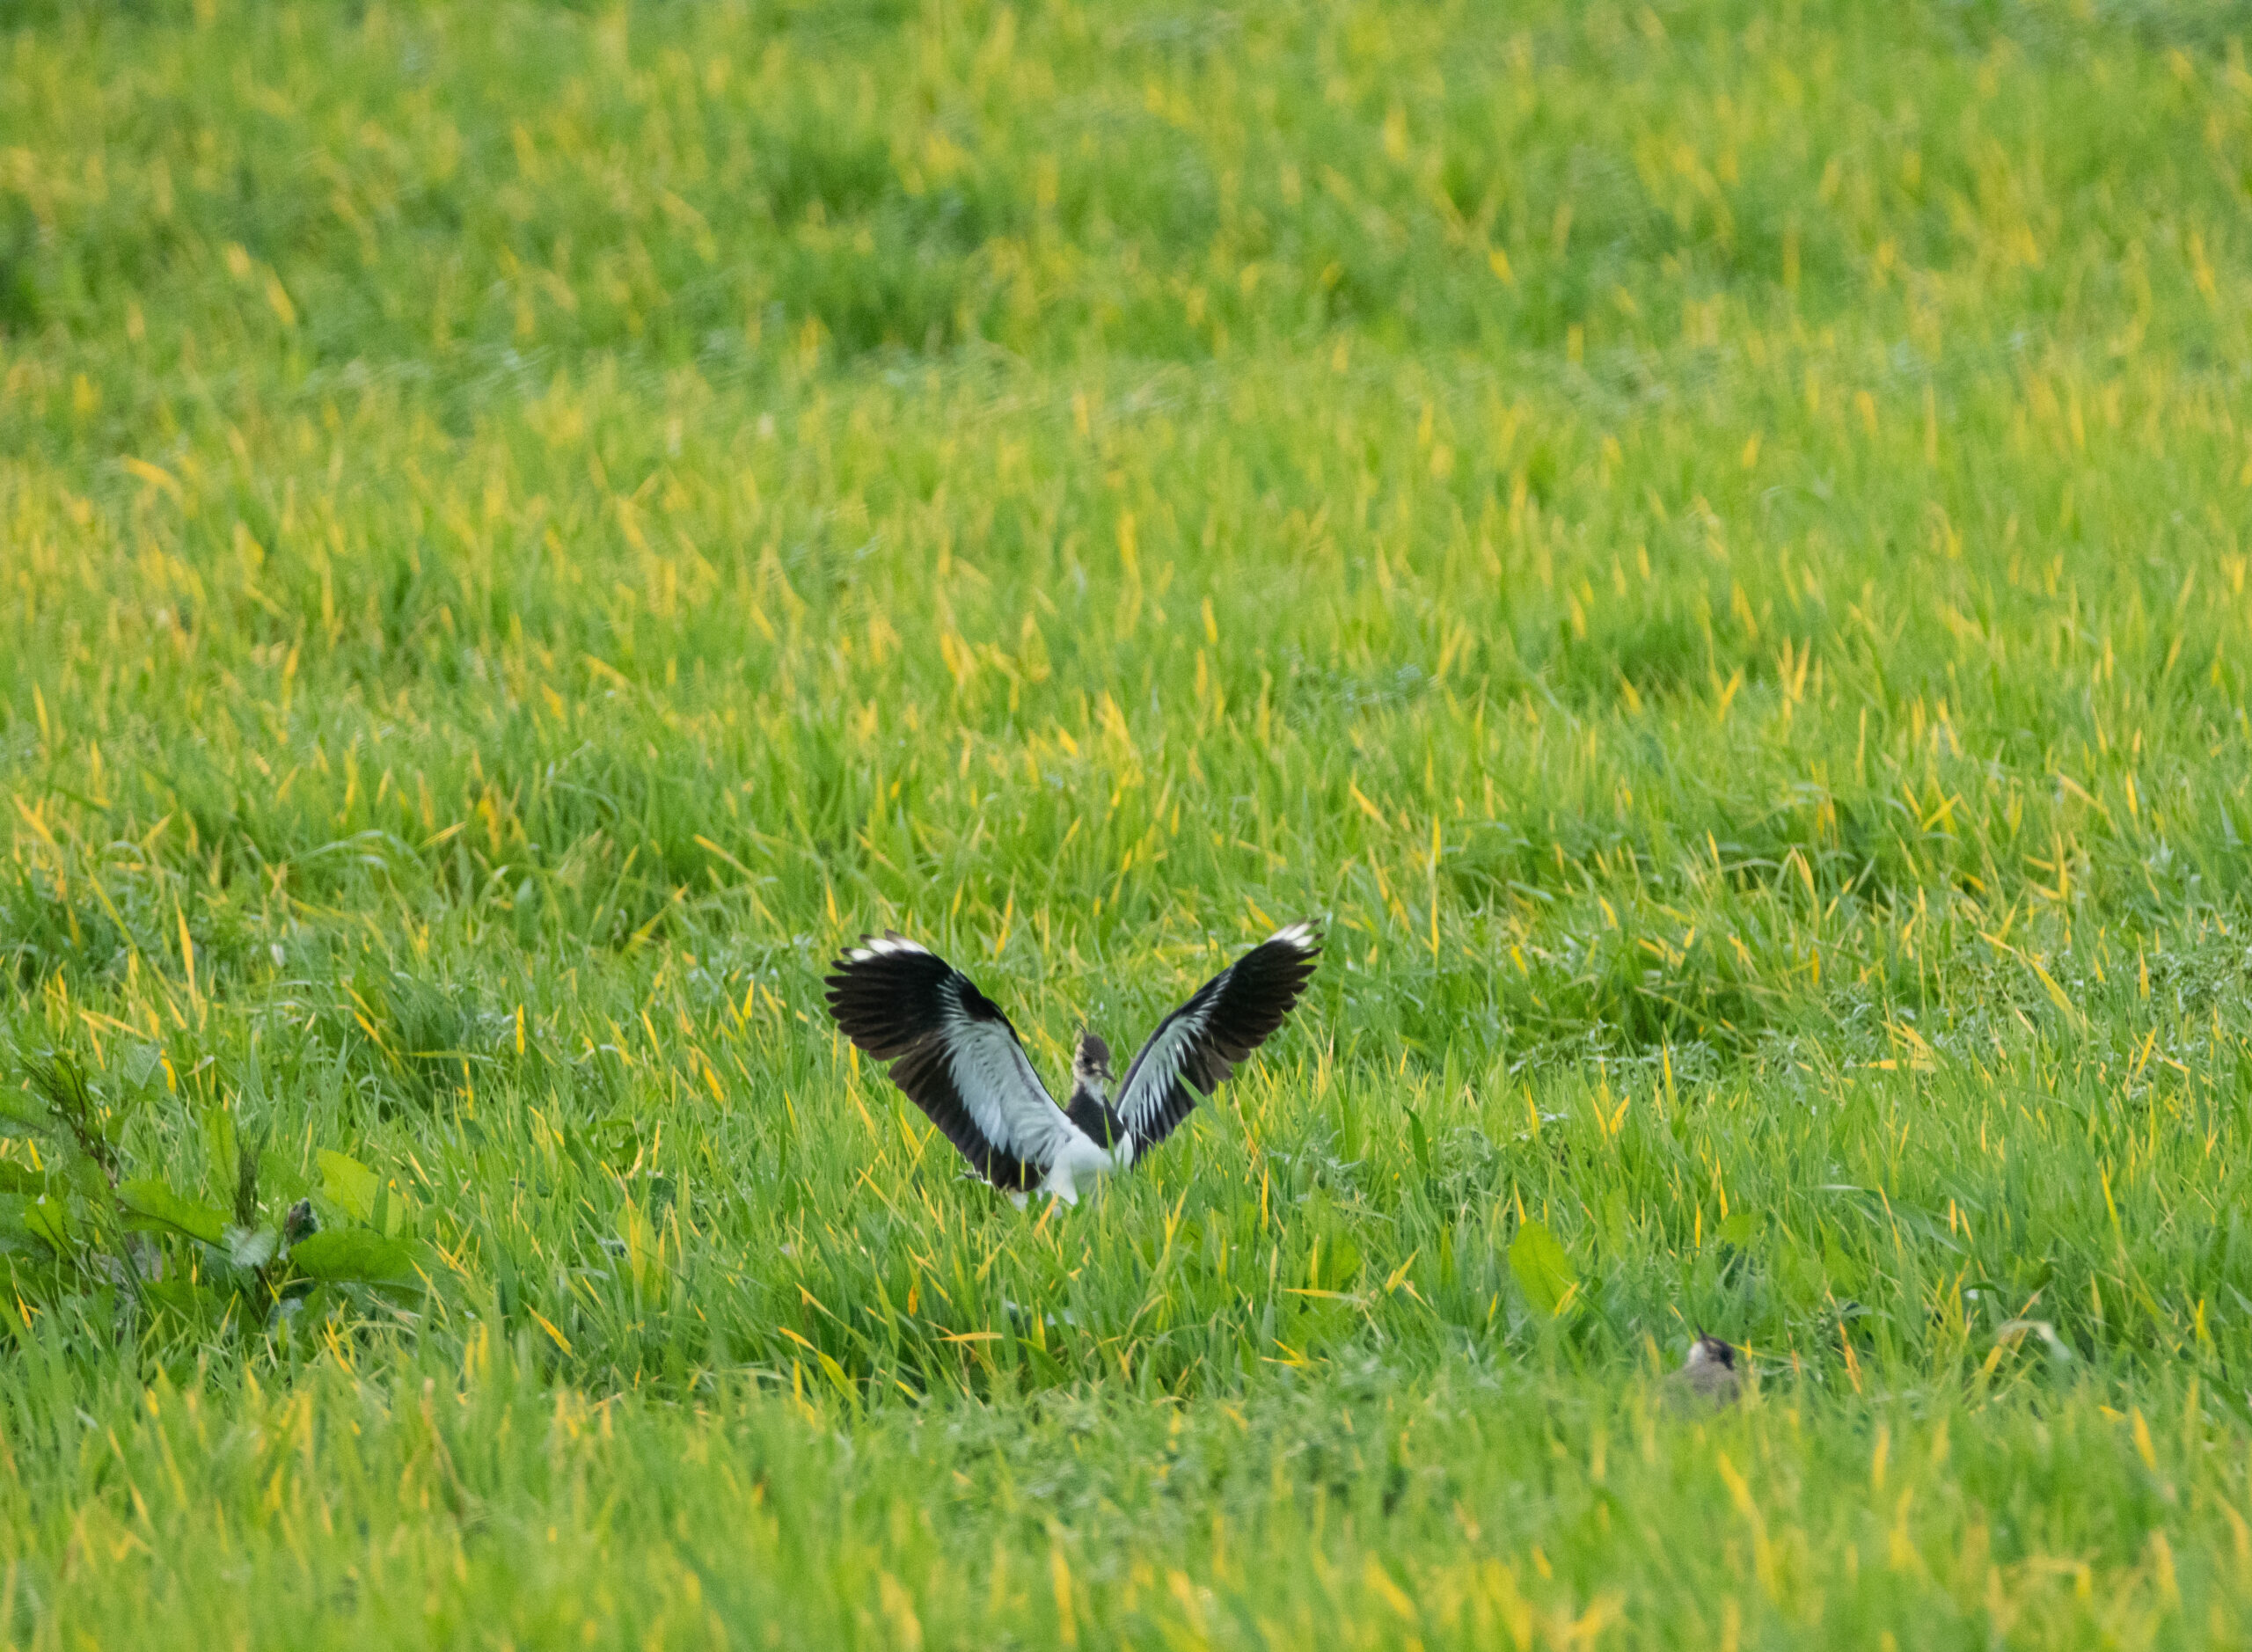 wings out lapwing in grass 2022